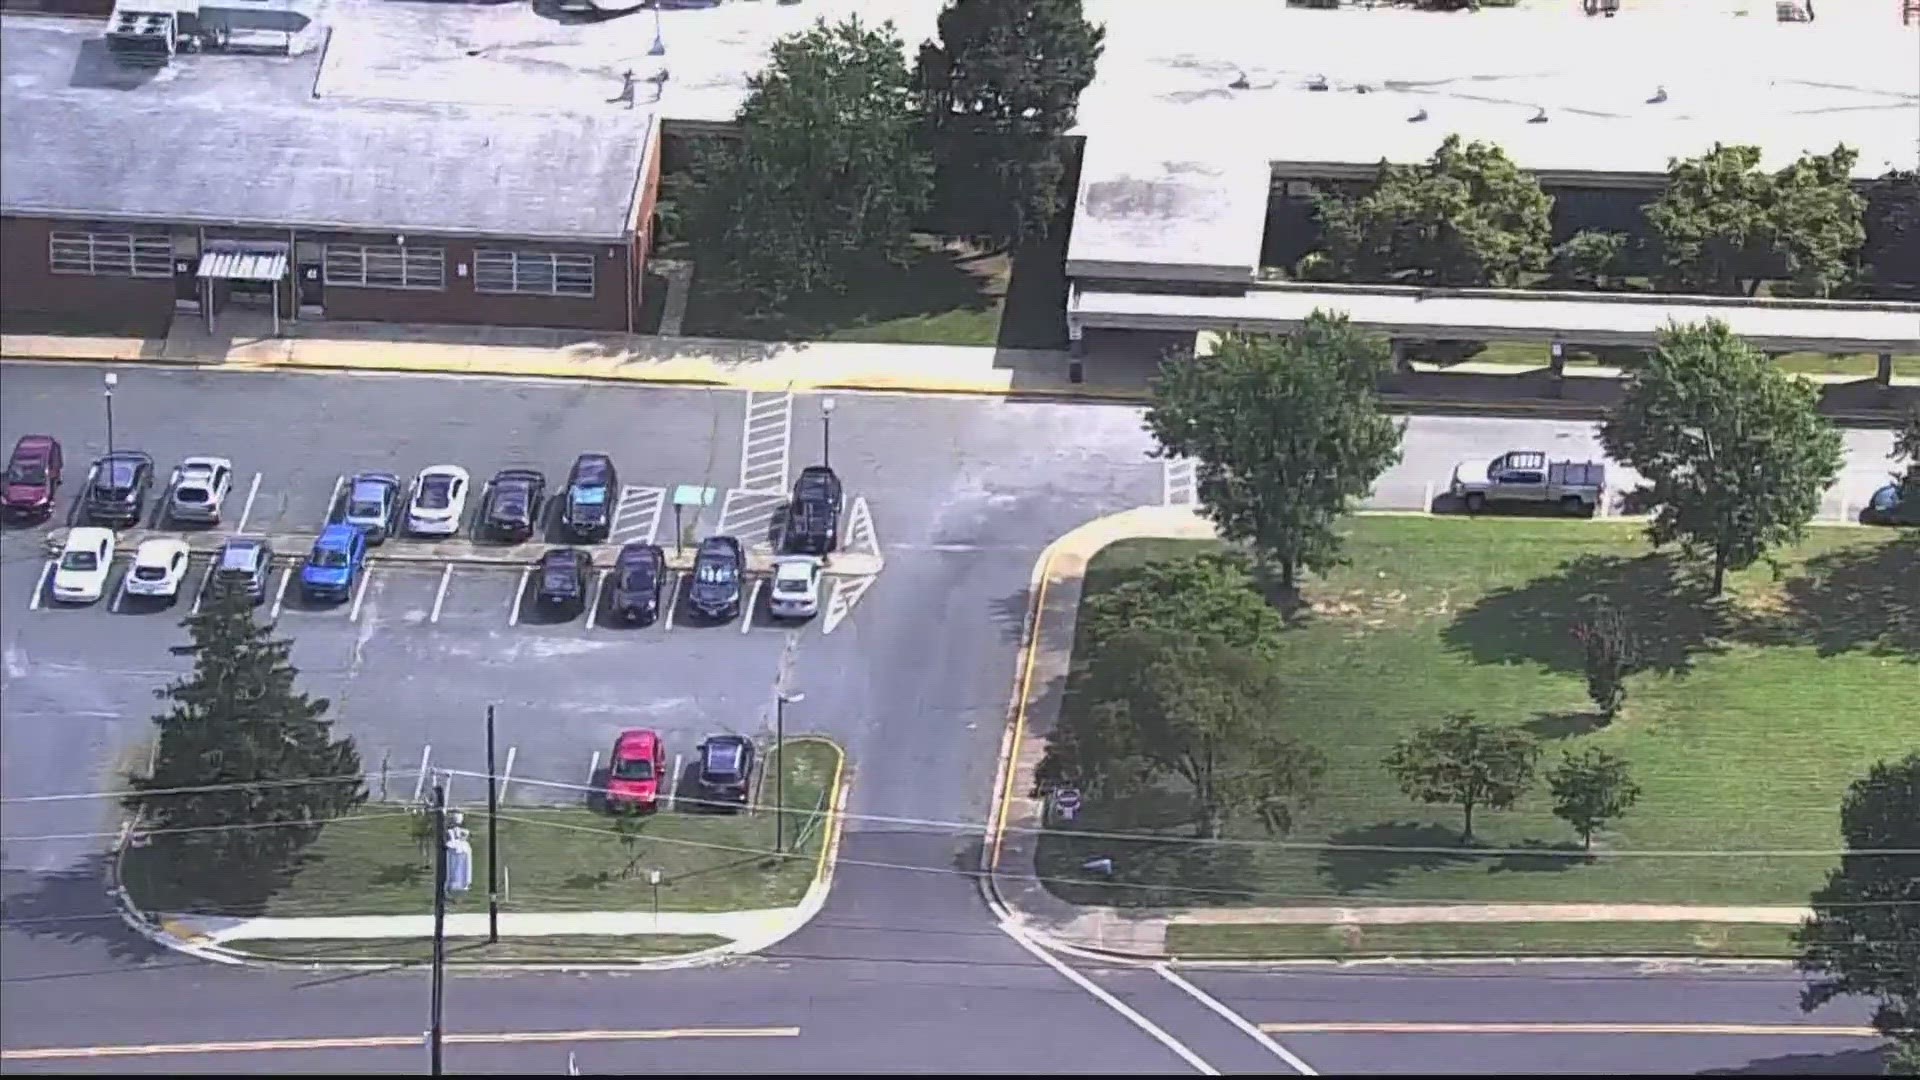 Police in Prince George's County are investigating after someone found a loaded gun inside a middle school.